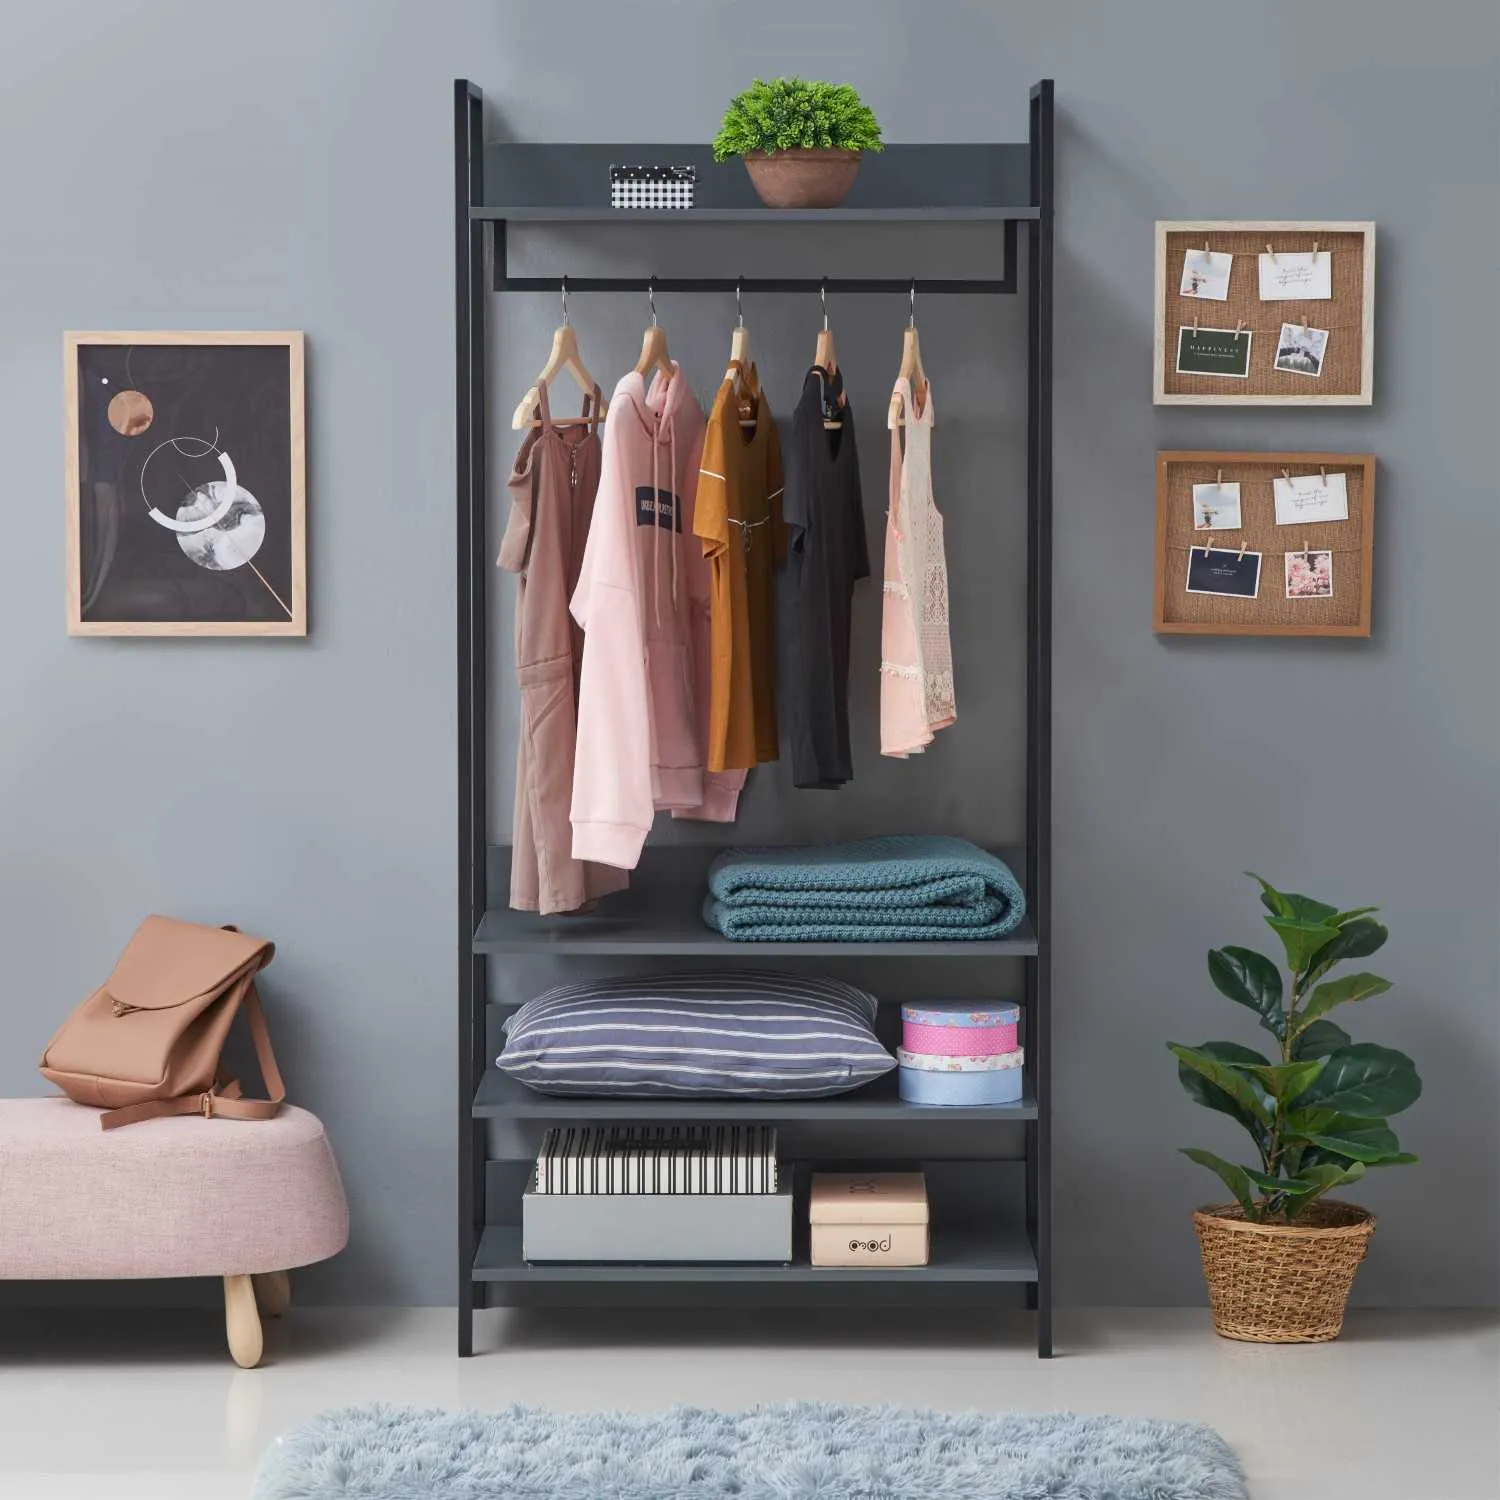 Dark Grey Effect Open Wardrobe Shelving With 4 Shelves Metal Outer Frame 180cm Tall